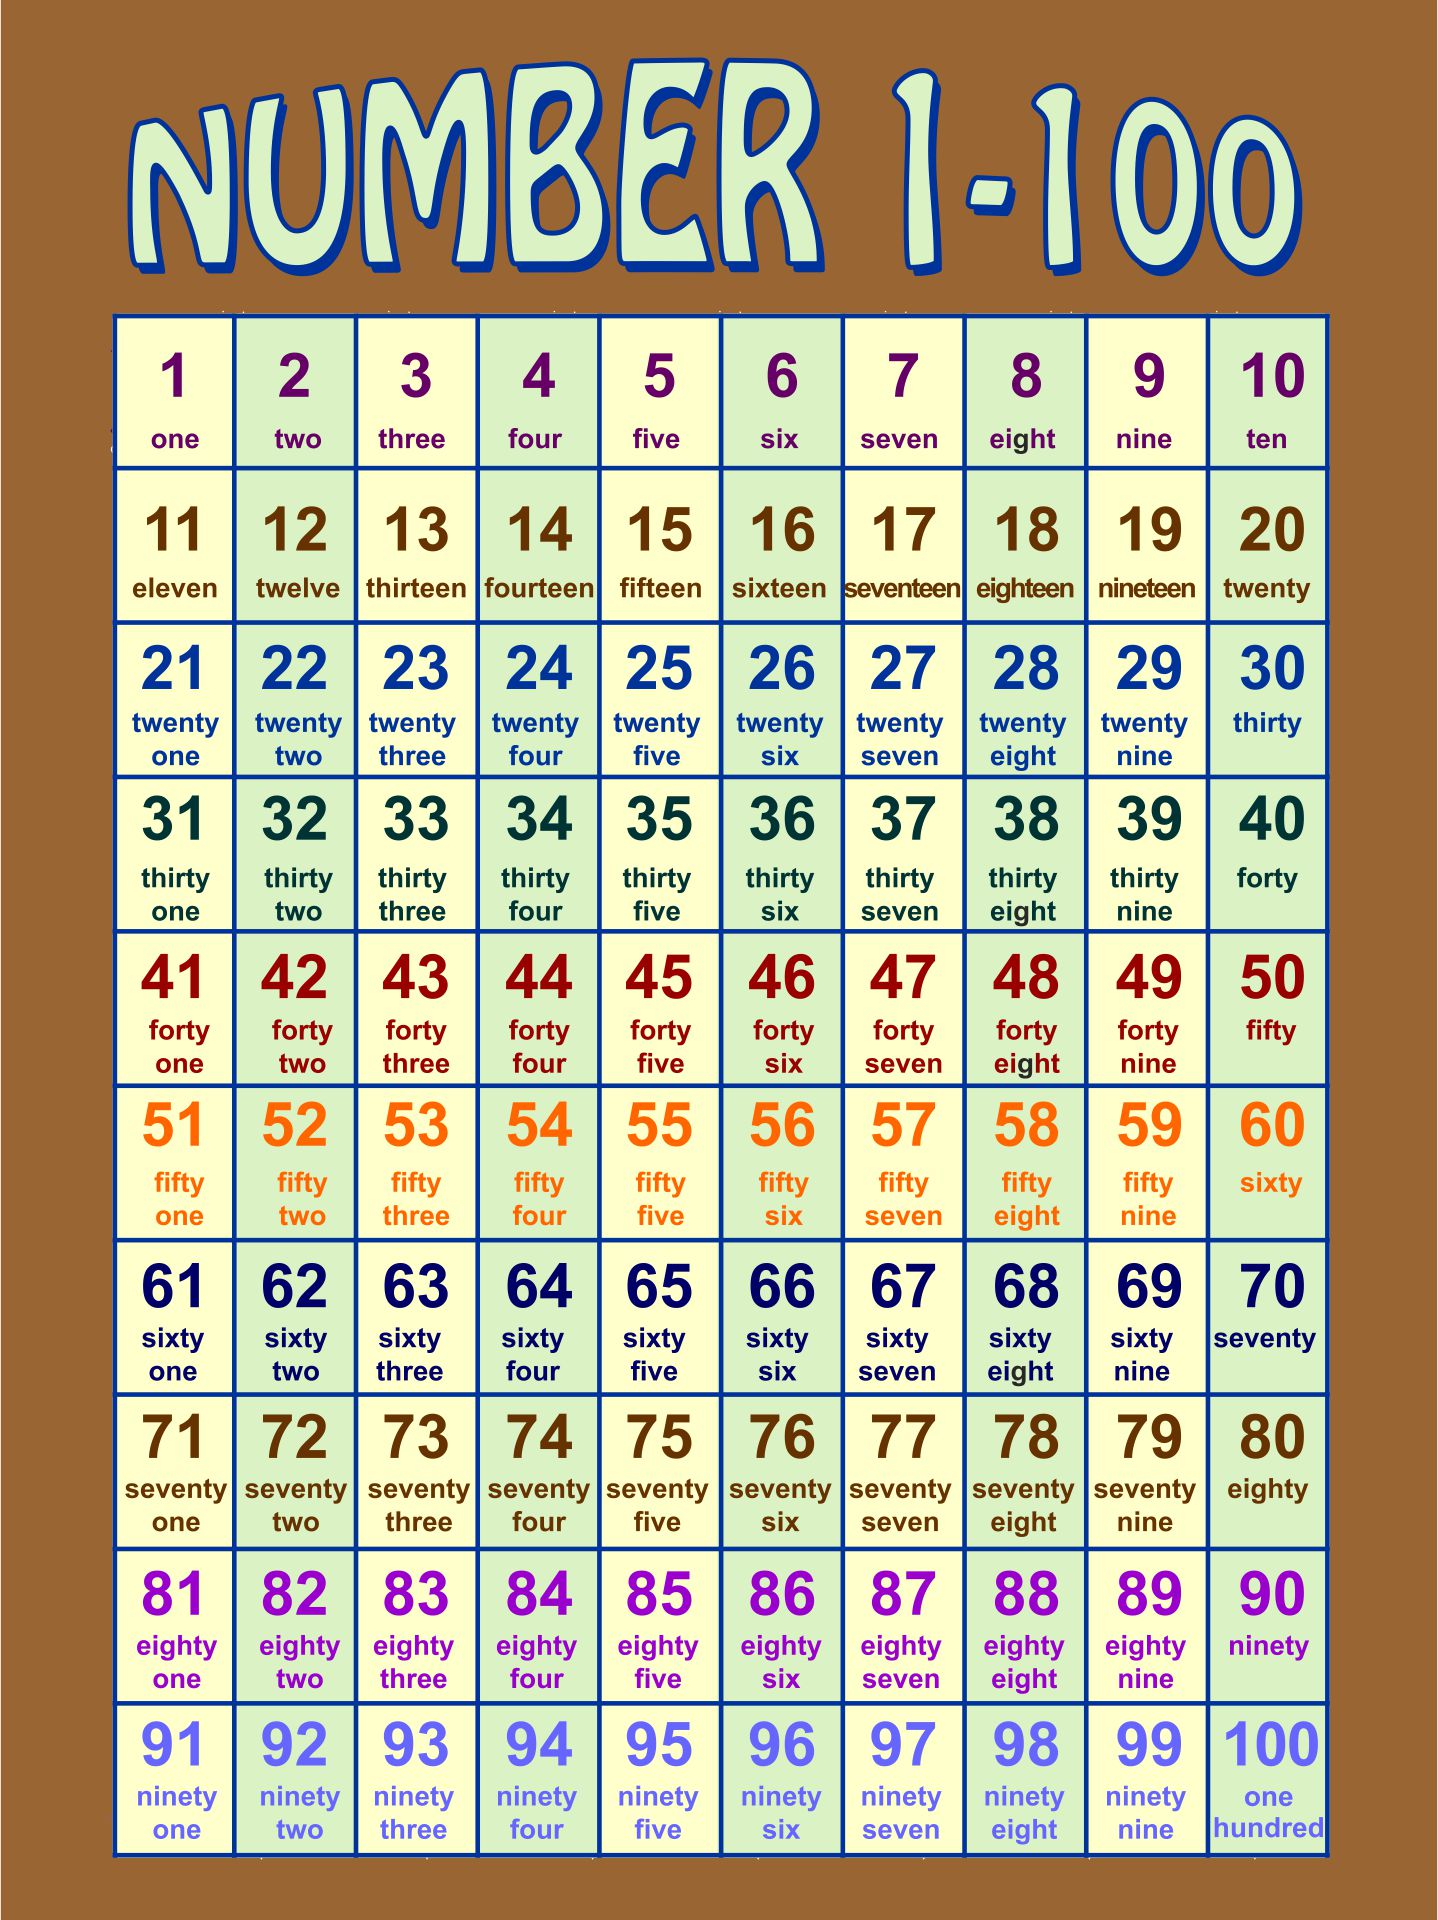 7 Best Images of Number Cards 1 100 Printable - Number Cards 1-20 ...